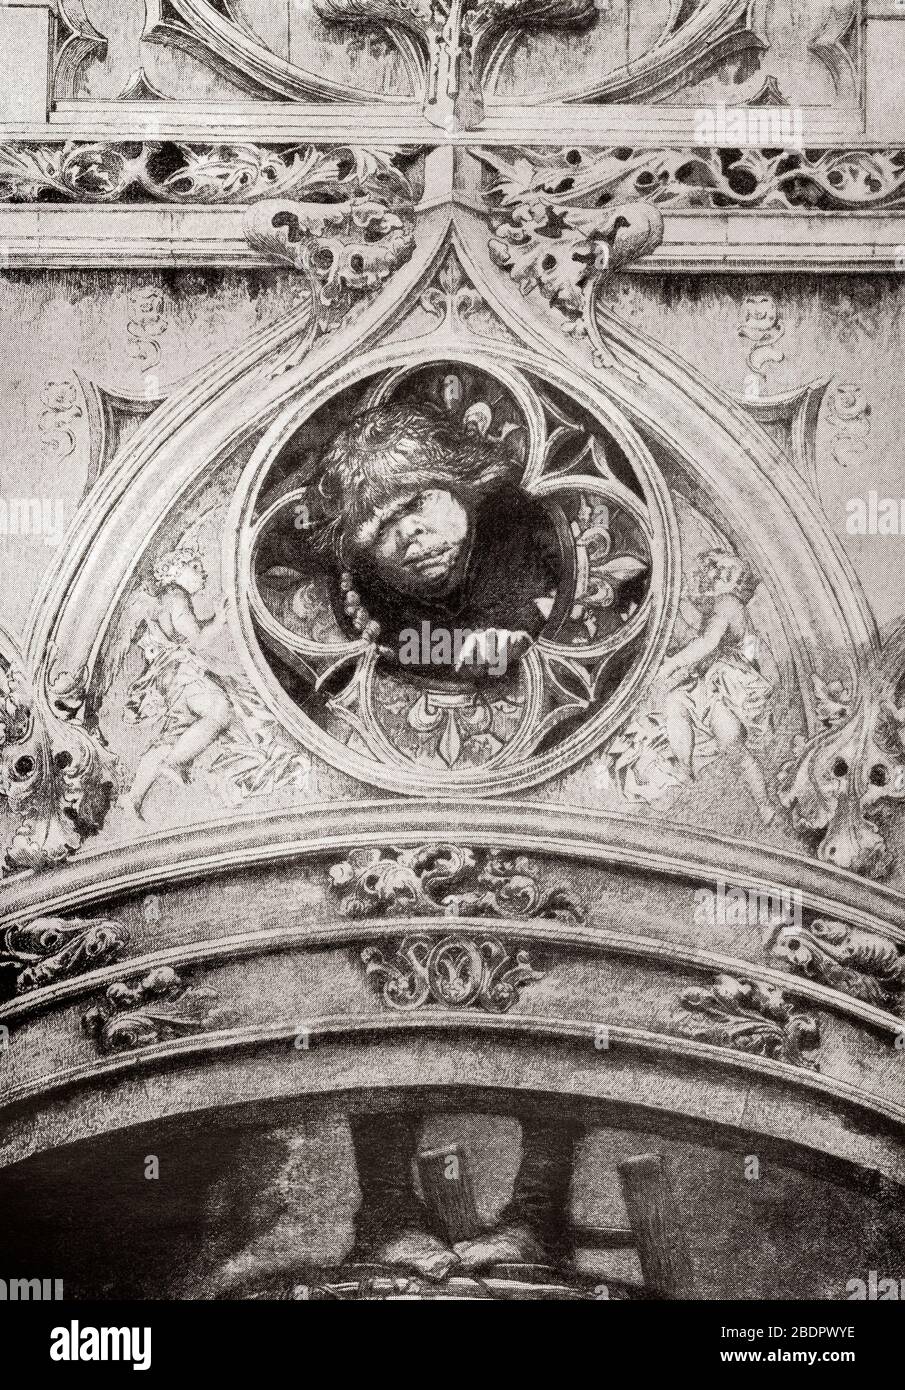 Quasimodo, the bell ringer of Notre-Dame, Paris, France.  From The International Library of Famous Literature, published c.1900 Stock Photo